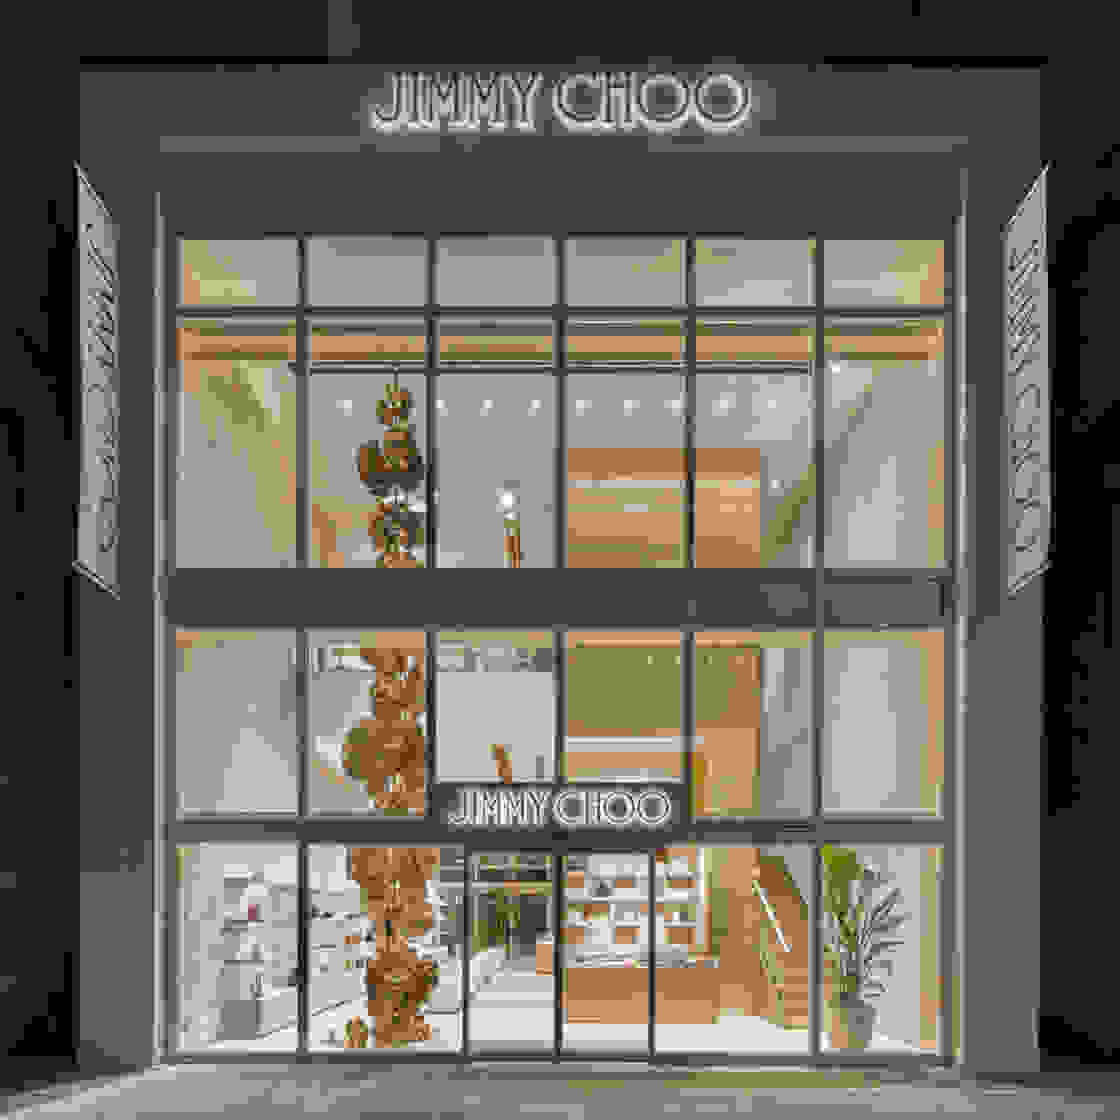 Jimmy Choo Unveils An Exclusive Ginza Concept Store Designed By Crosby Studios  